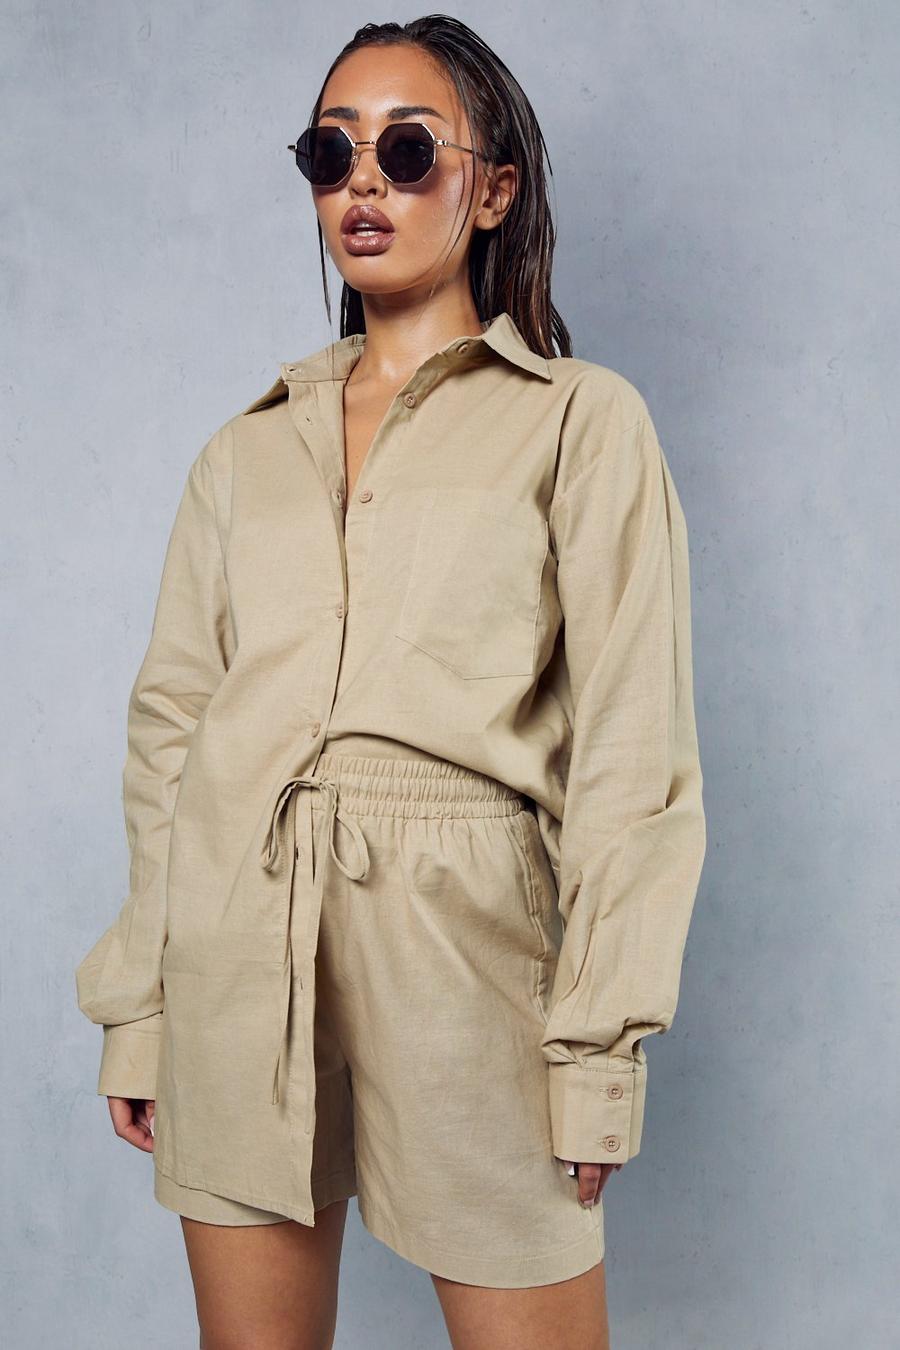 Stone Oversized Linen Look Shirt image number 1